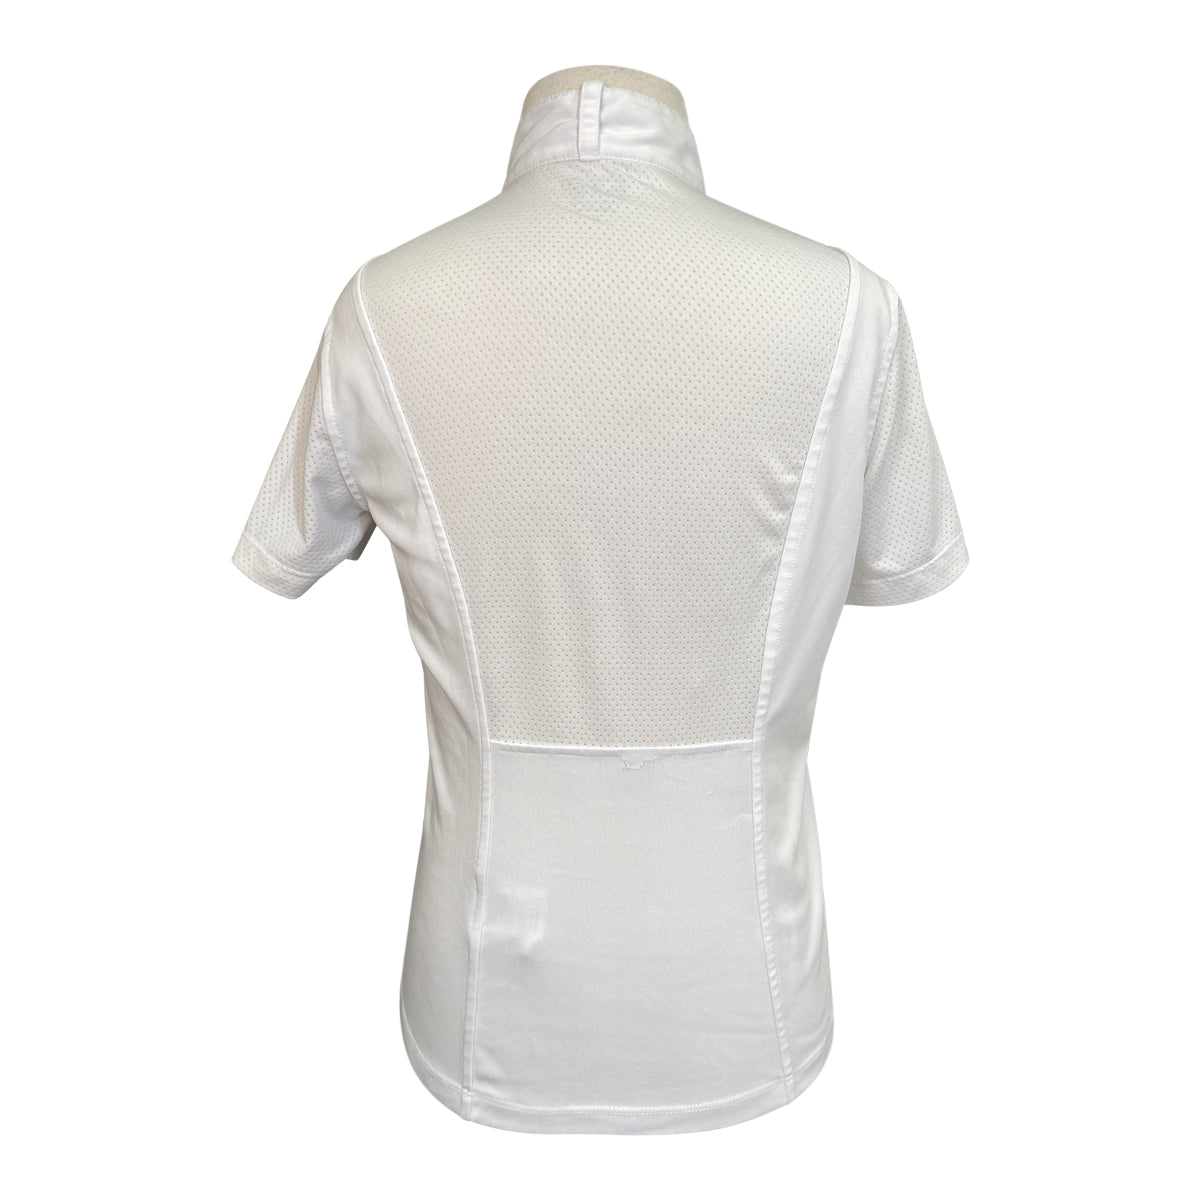 Riding Sport Essential Short Sleeve Show Shirt in White